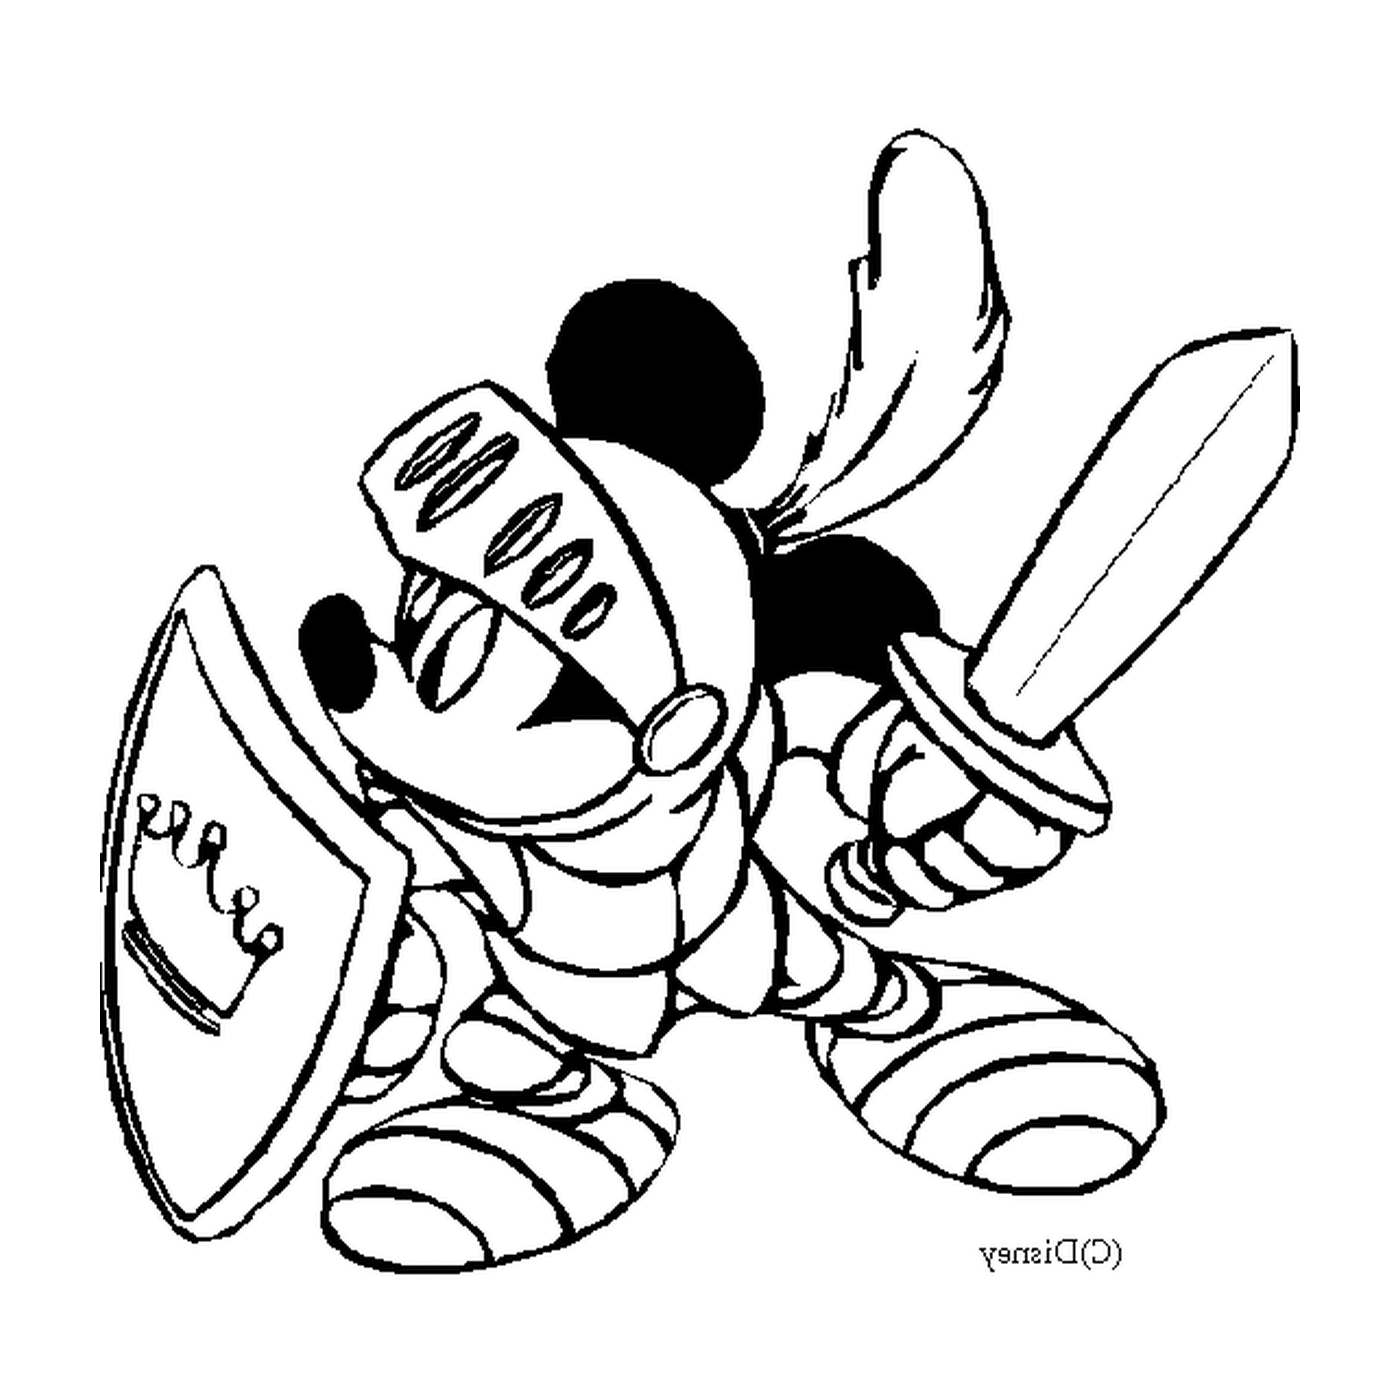  Mickey knight: Mickey Mouse in armor holding a sword 